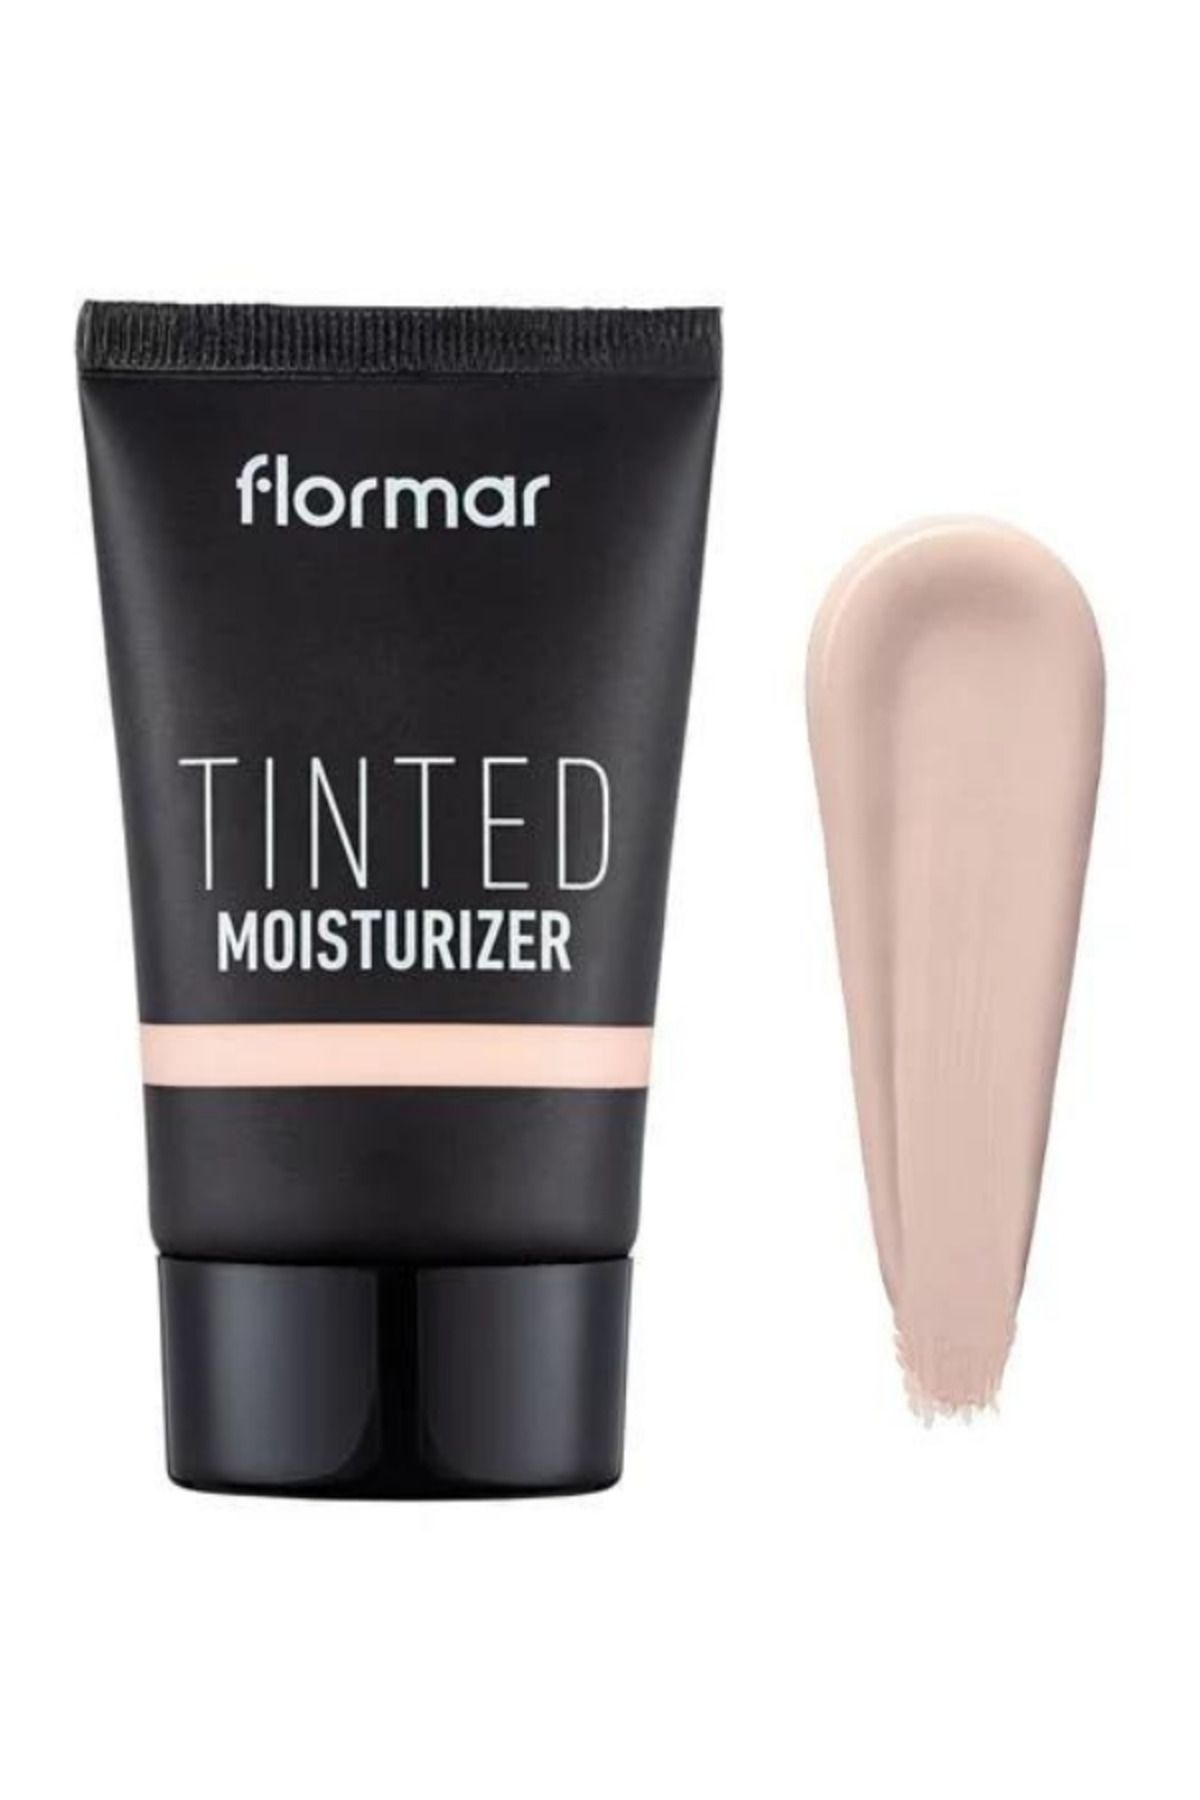 Flormar SKİN BRİGHTENİNG TİNTED MOİSTURİZER THAT GİVES A RADİANT LOOK | 30ML PSSN2522